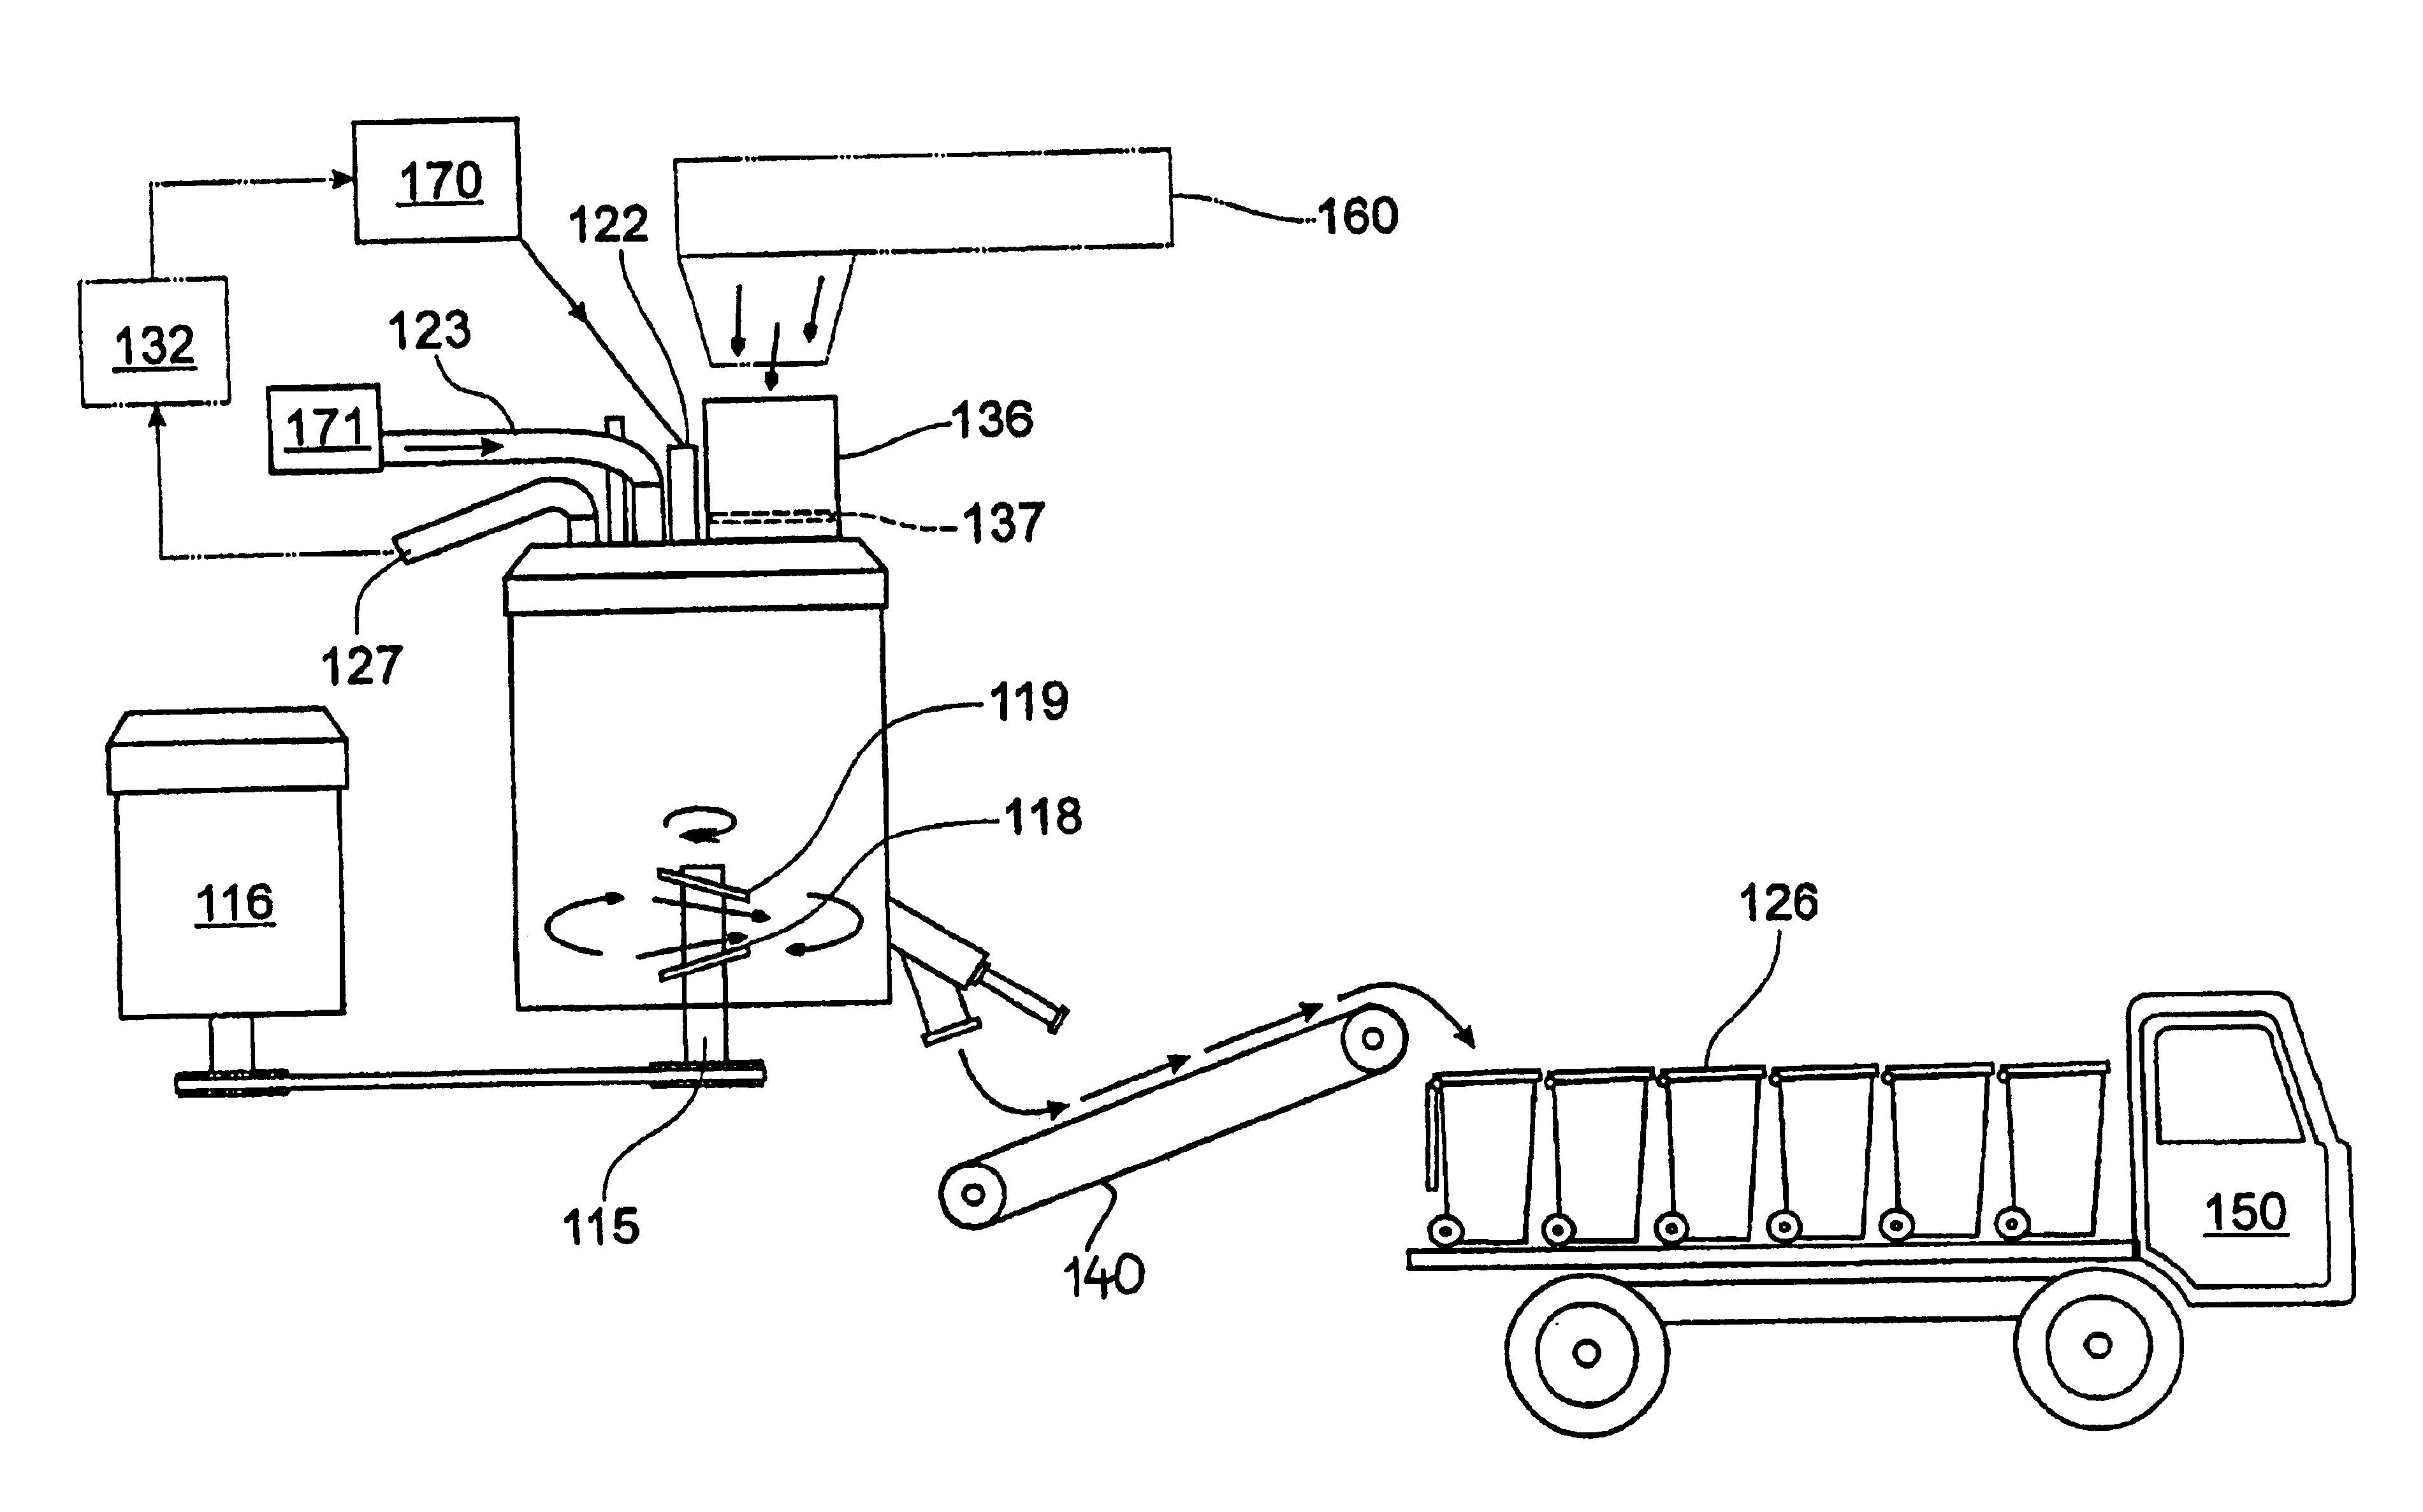 Snow making method and apparatus